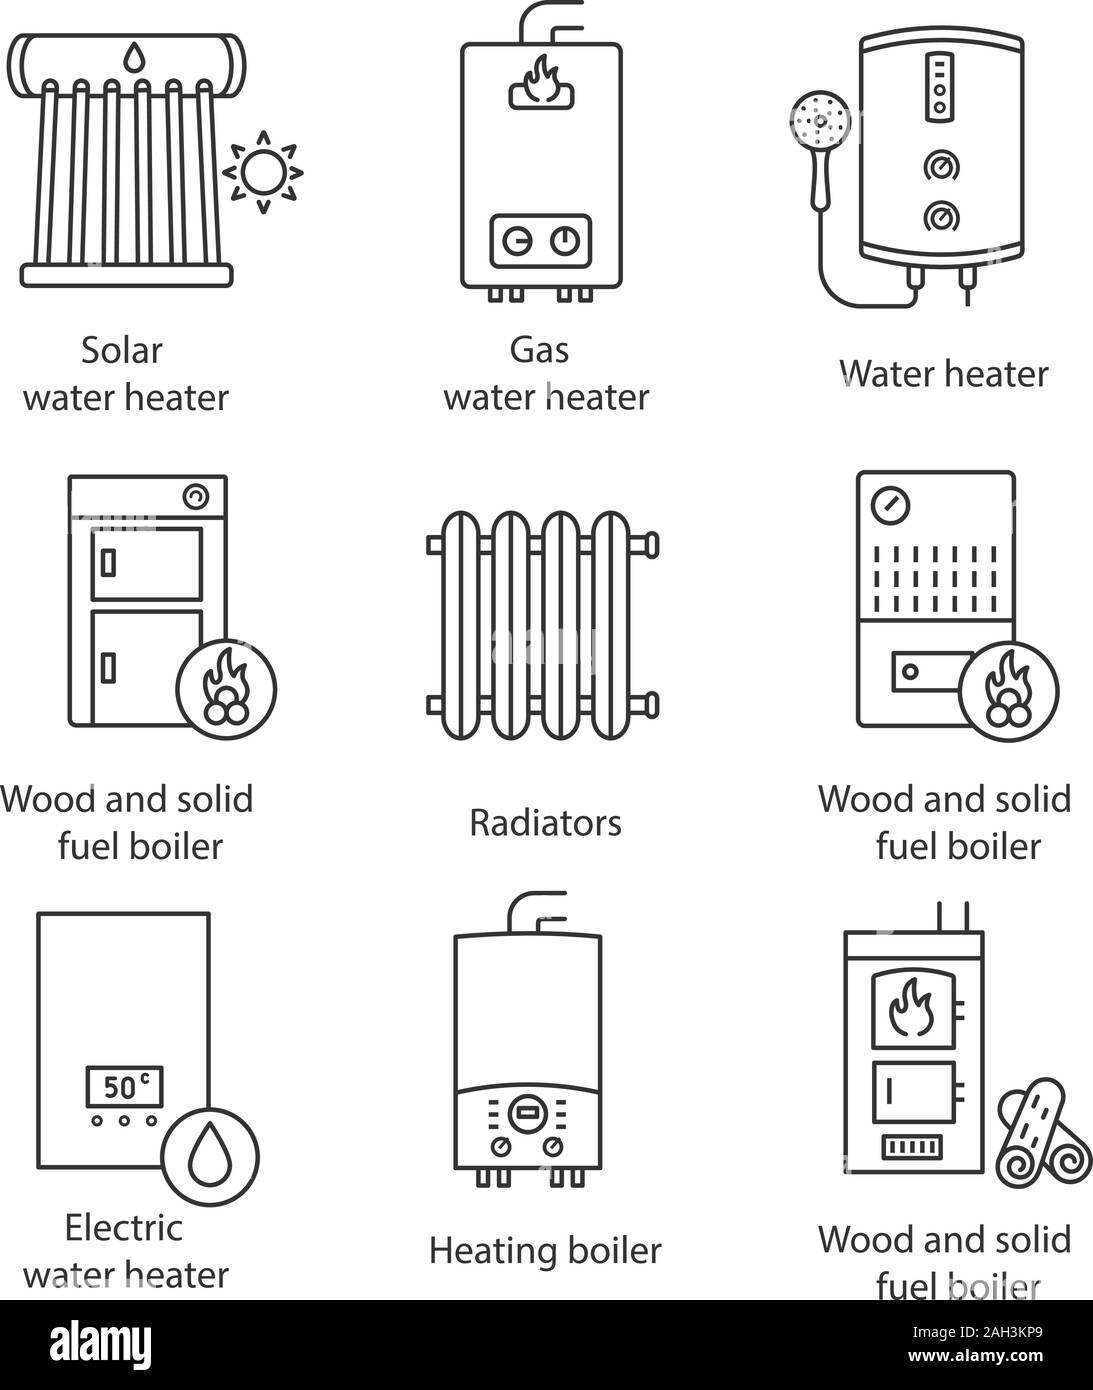 Heating linear icons set. Boilers, radiators, water heaters. Gas, electric, solid fuel, pellet, solar boilers. Isolated vector outline illustrations. Stock Vector